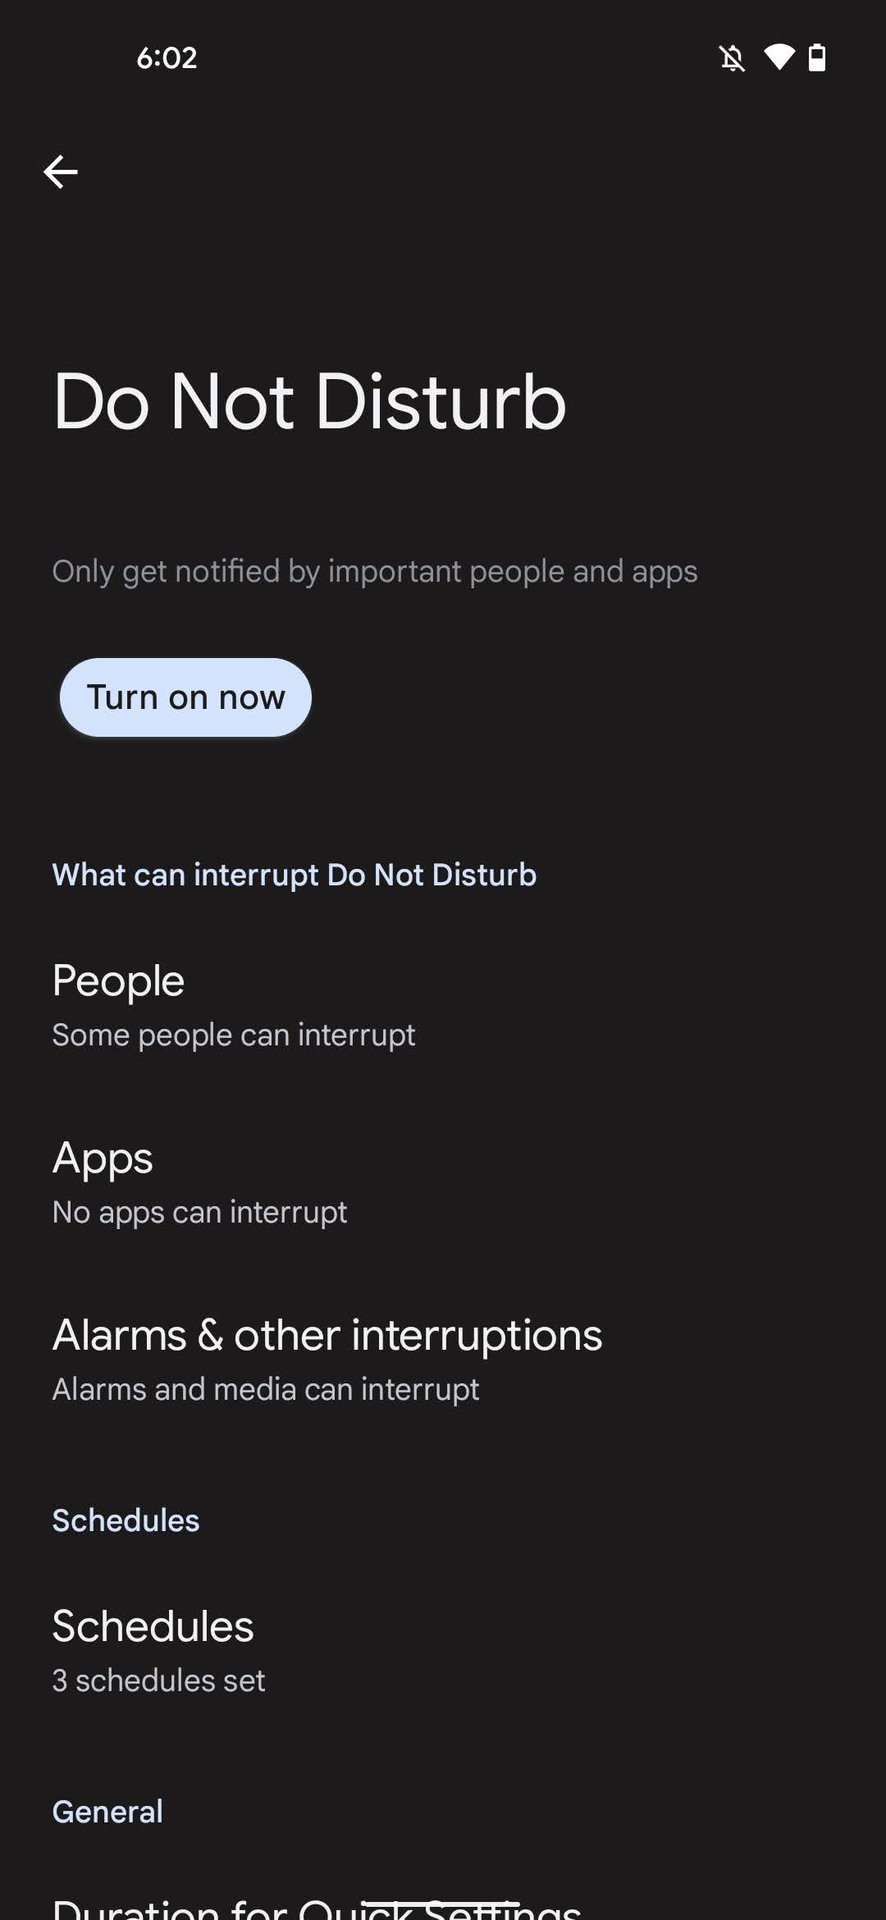 How to turn on Do Not Disturb from the settings 3